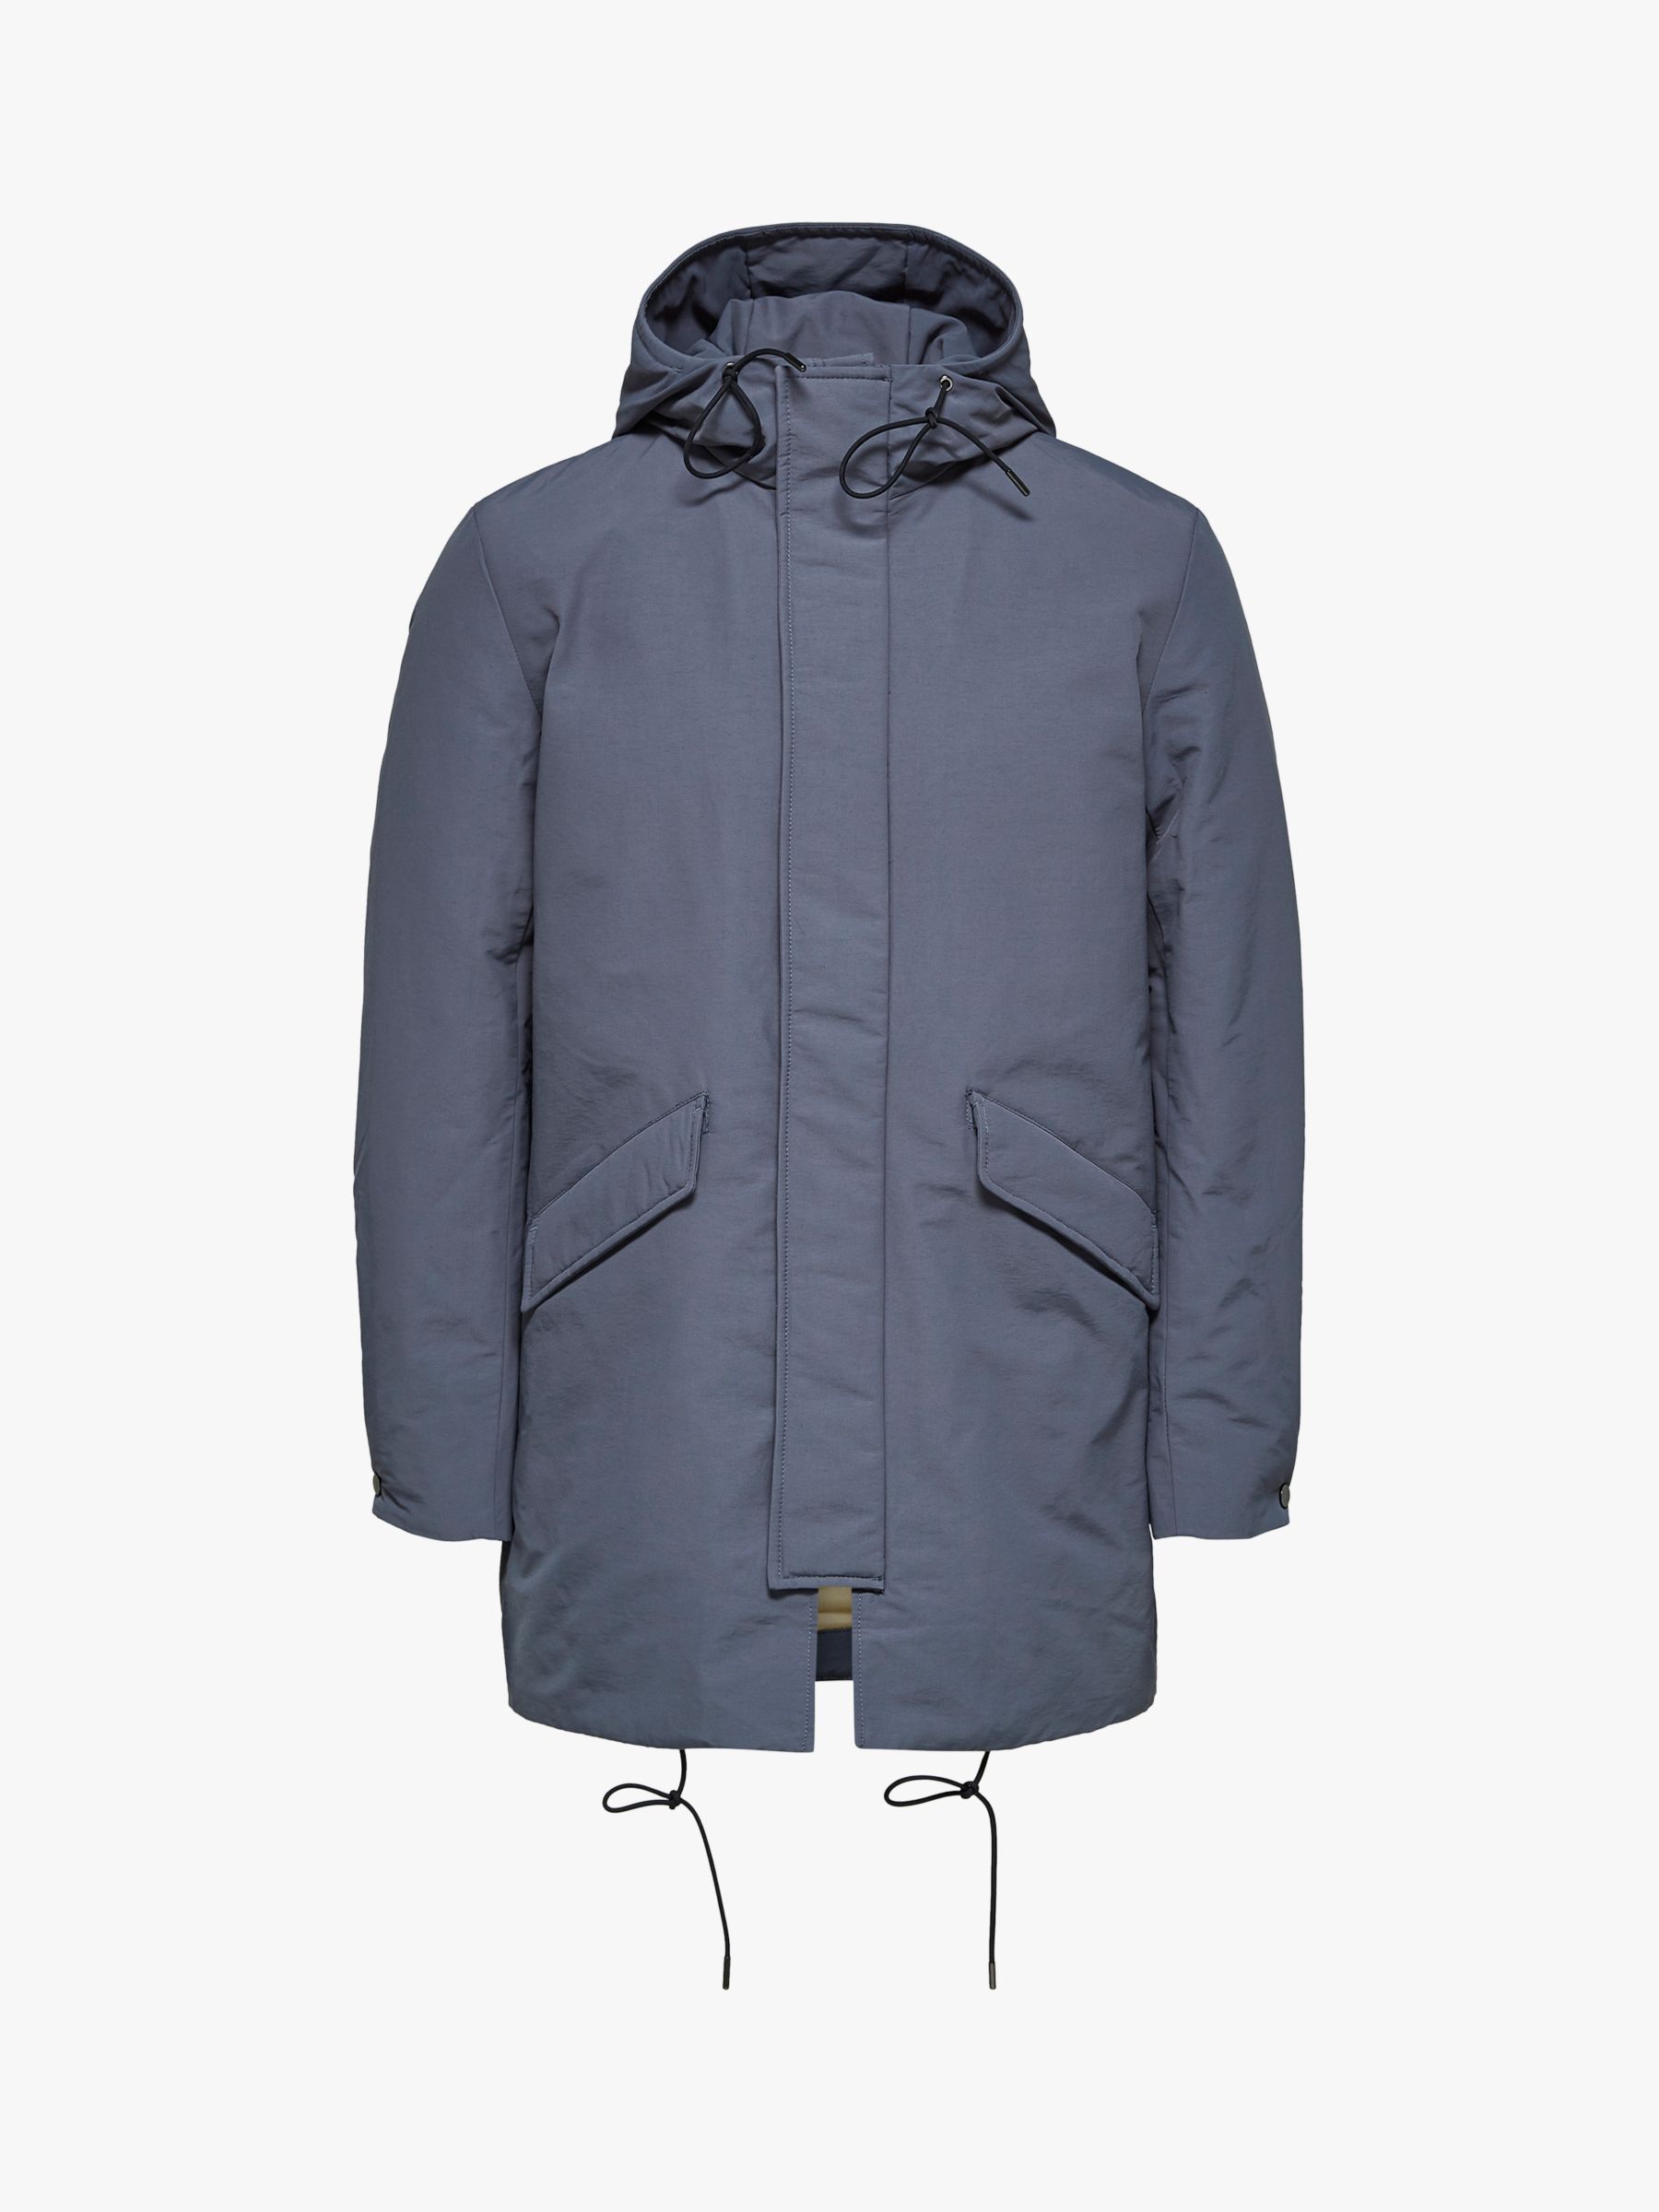 SELECTED HOMME Park Parka, Turblence